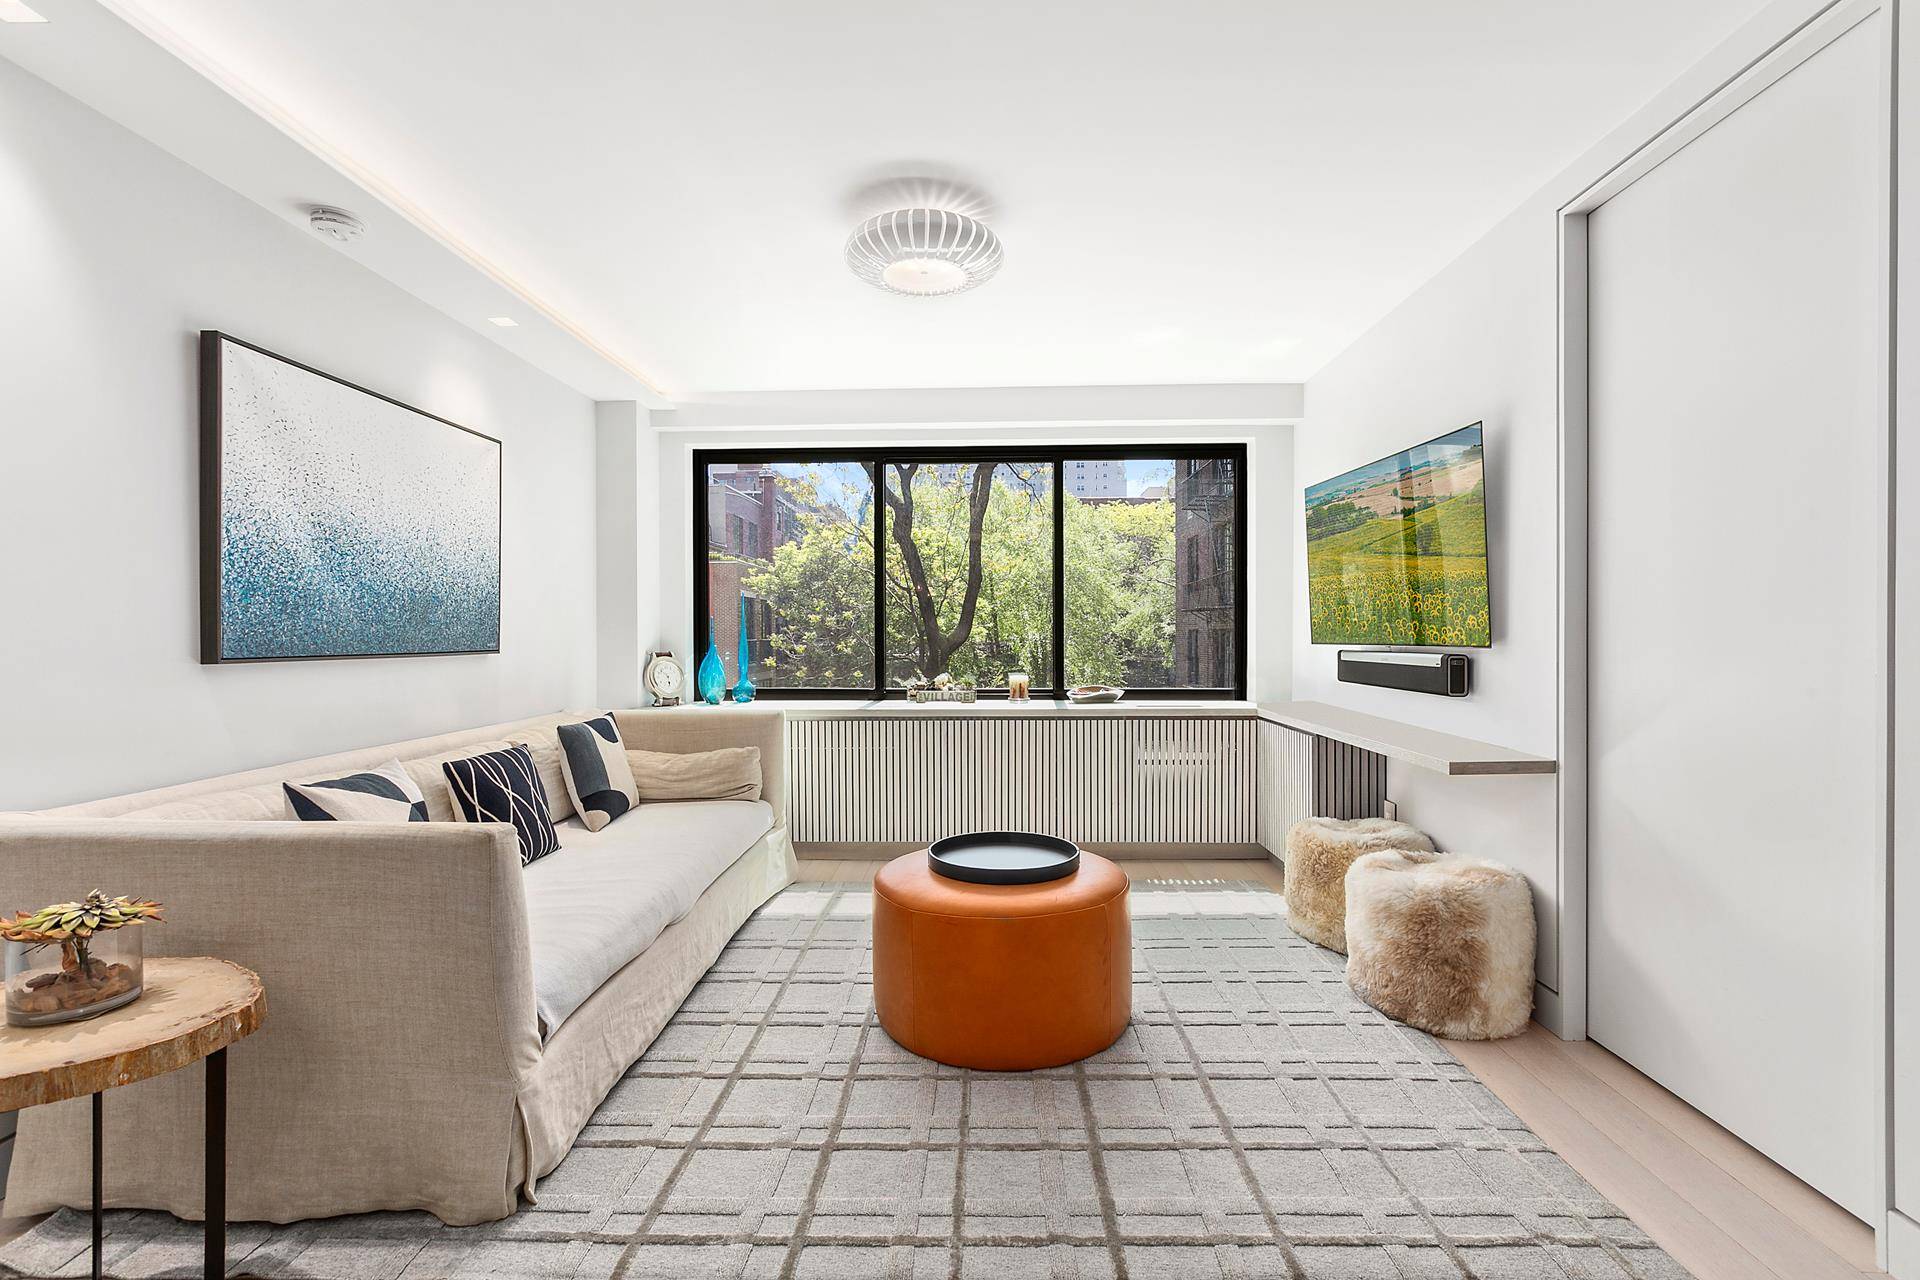 High end gut renovated three bedroom two bath condominium with full time doorman, picture perfect garden views and incredibly low monthlies at the crossroads of Greenwich Village and the West ...